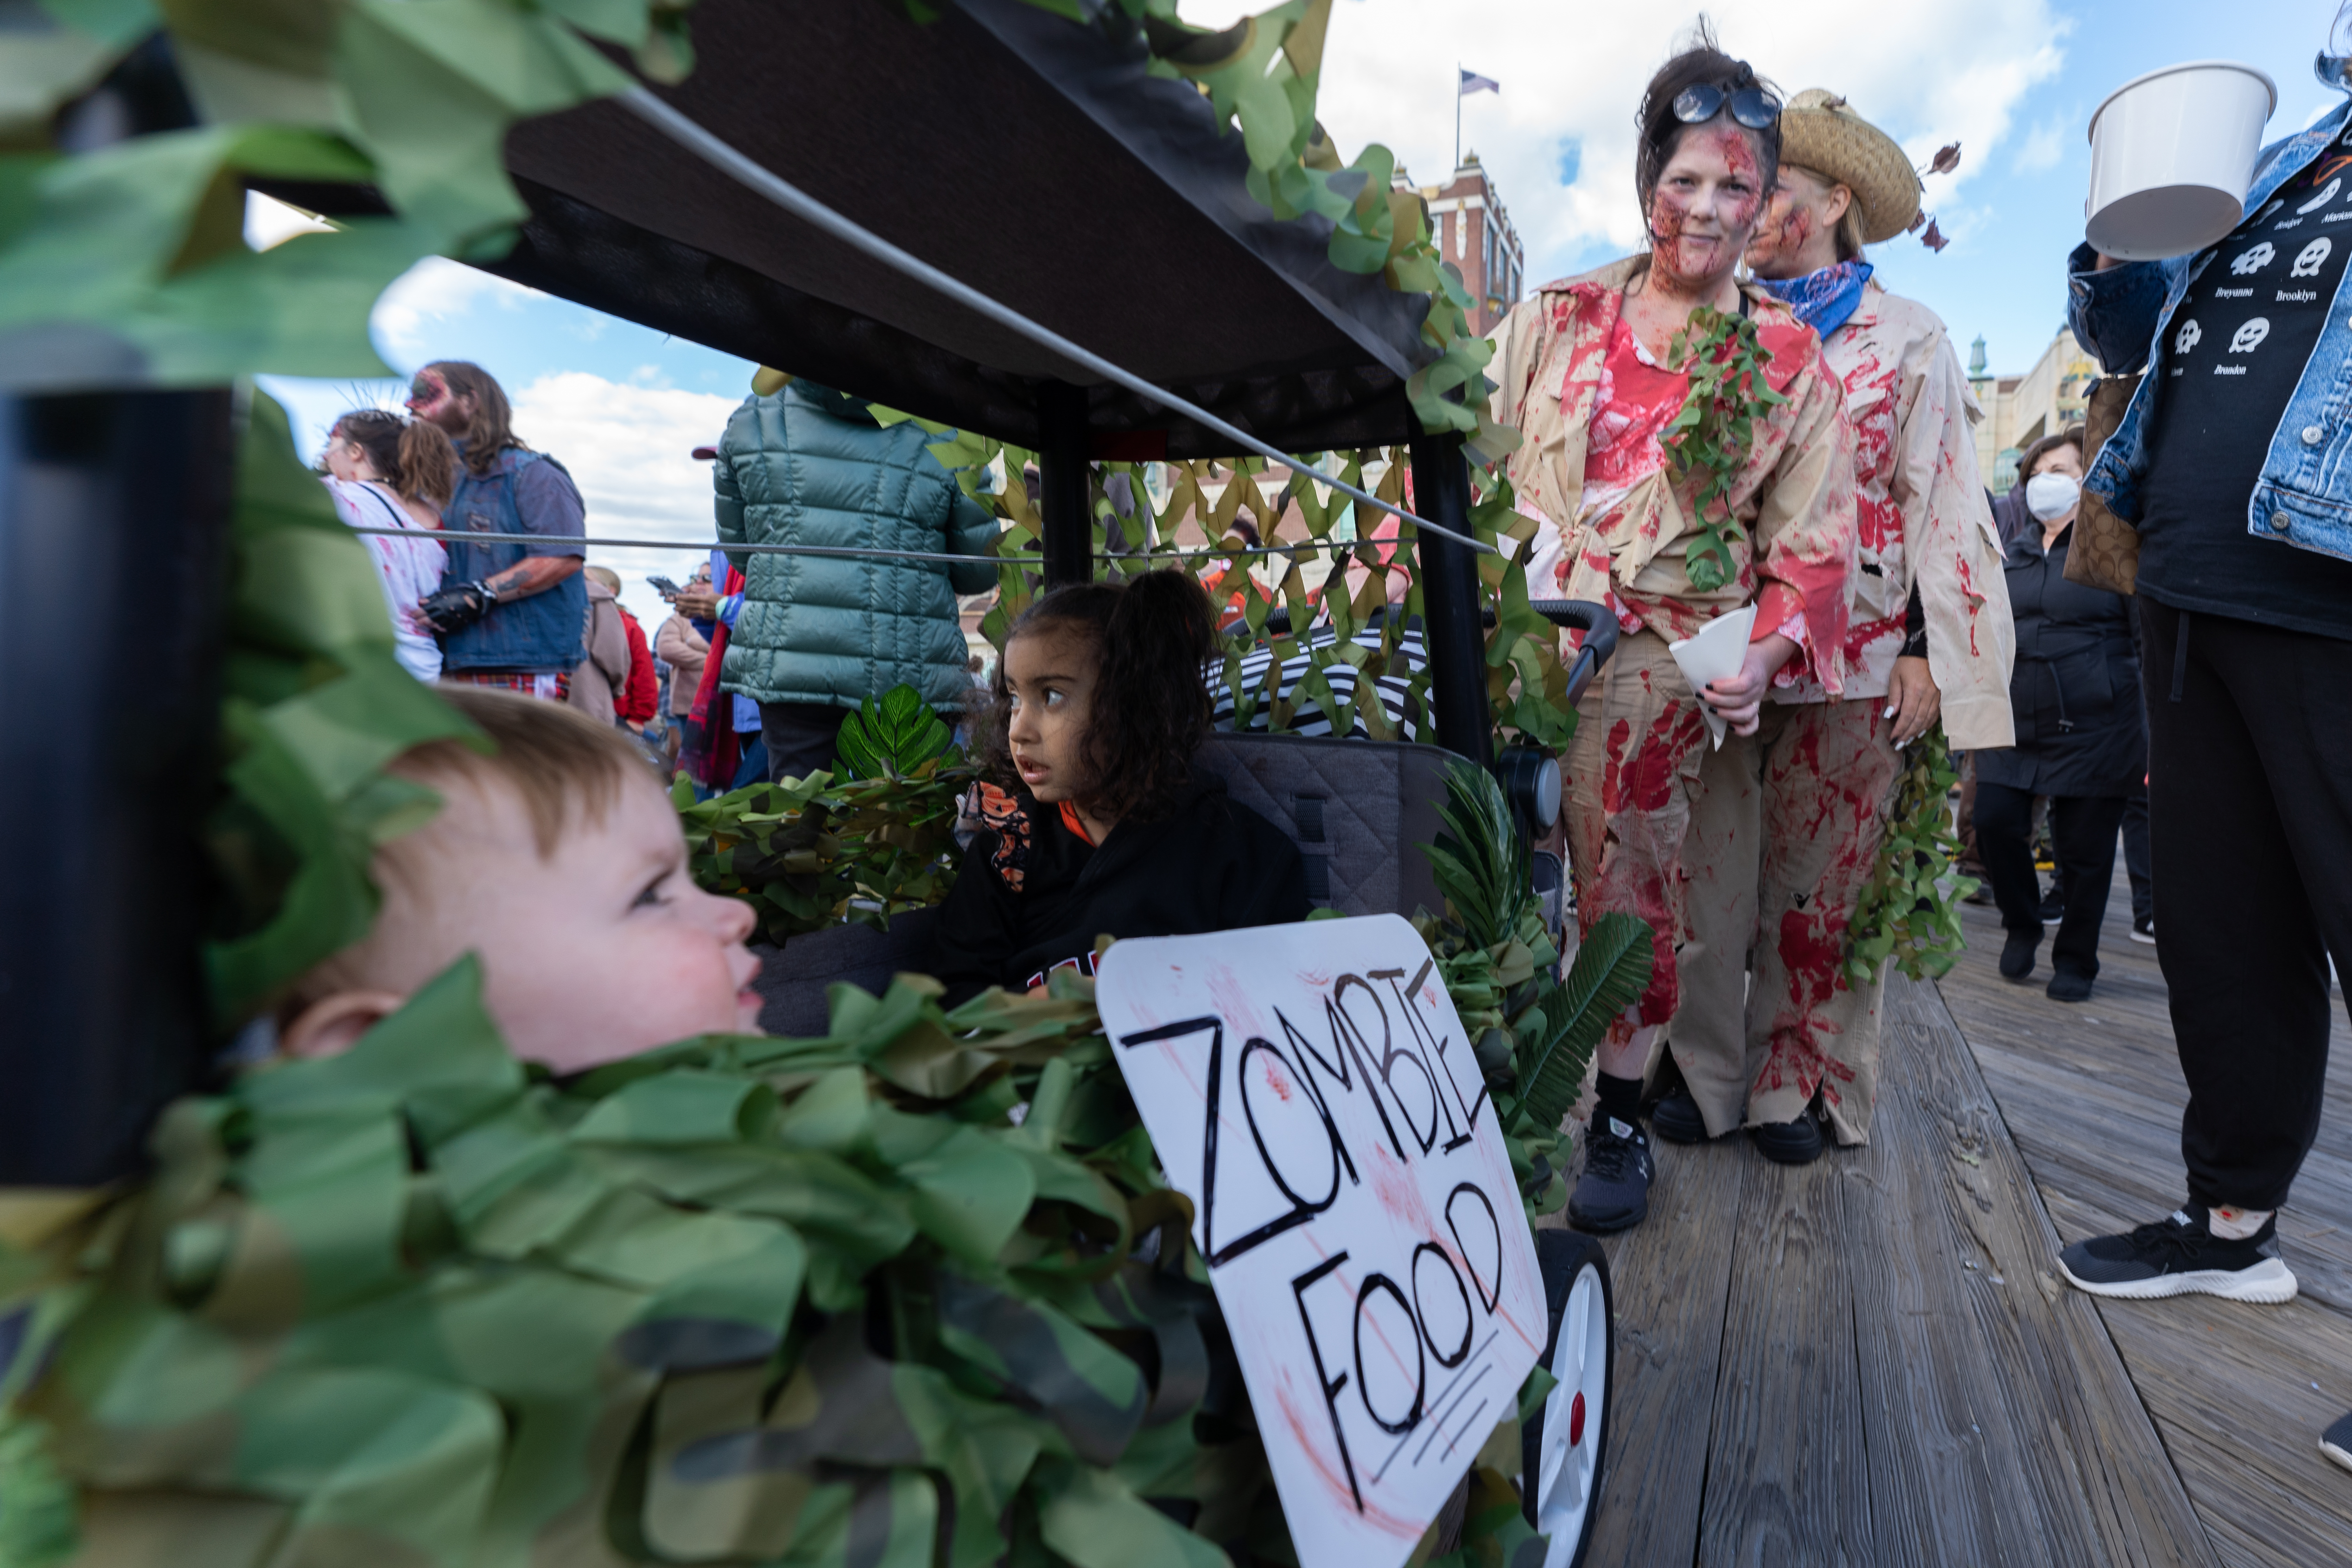 Two zombies push a cart of "zombie food" along the boardwalk during the 14th Asbury Park Zombie Walk in Asbury Park on Saturday, October 8, 2022. The zombie walk held its first themed year with the theme being 80's and 90's punk and metal.